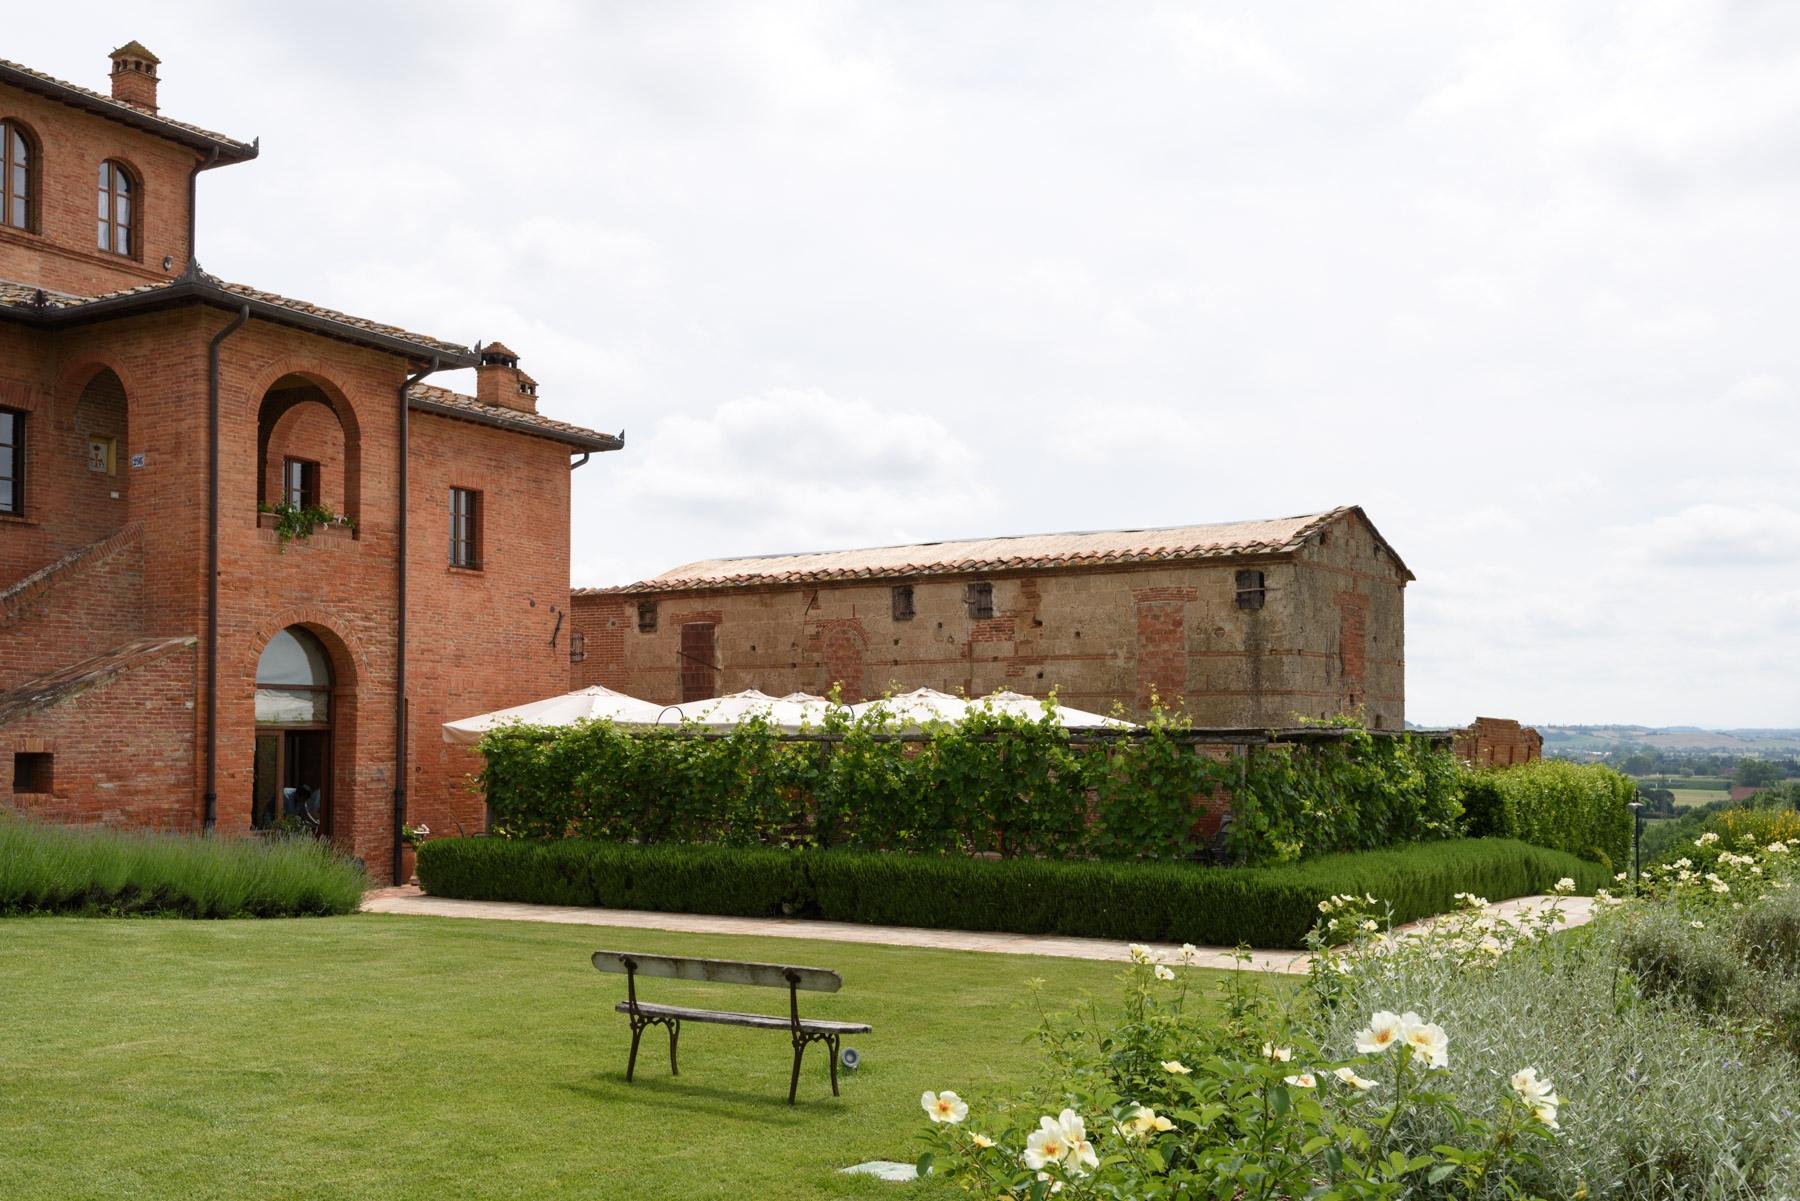 Country hotel with adjacent private villa near Siena - 28